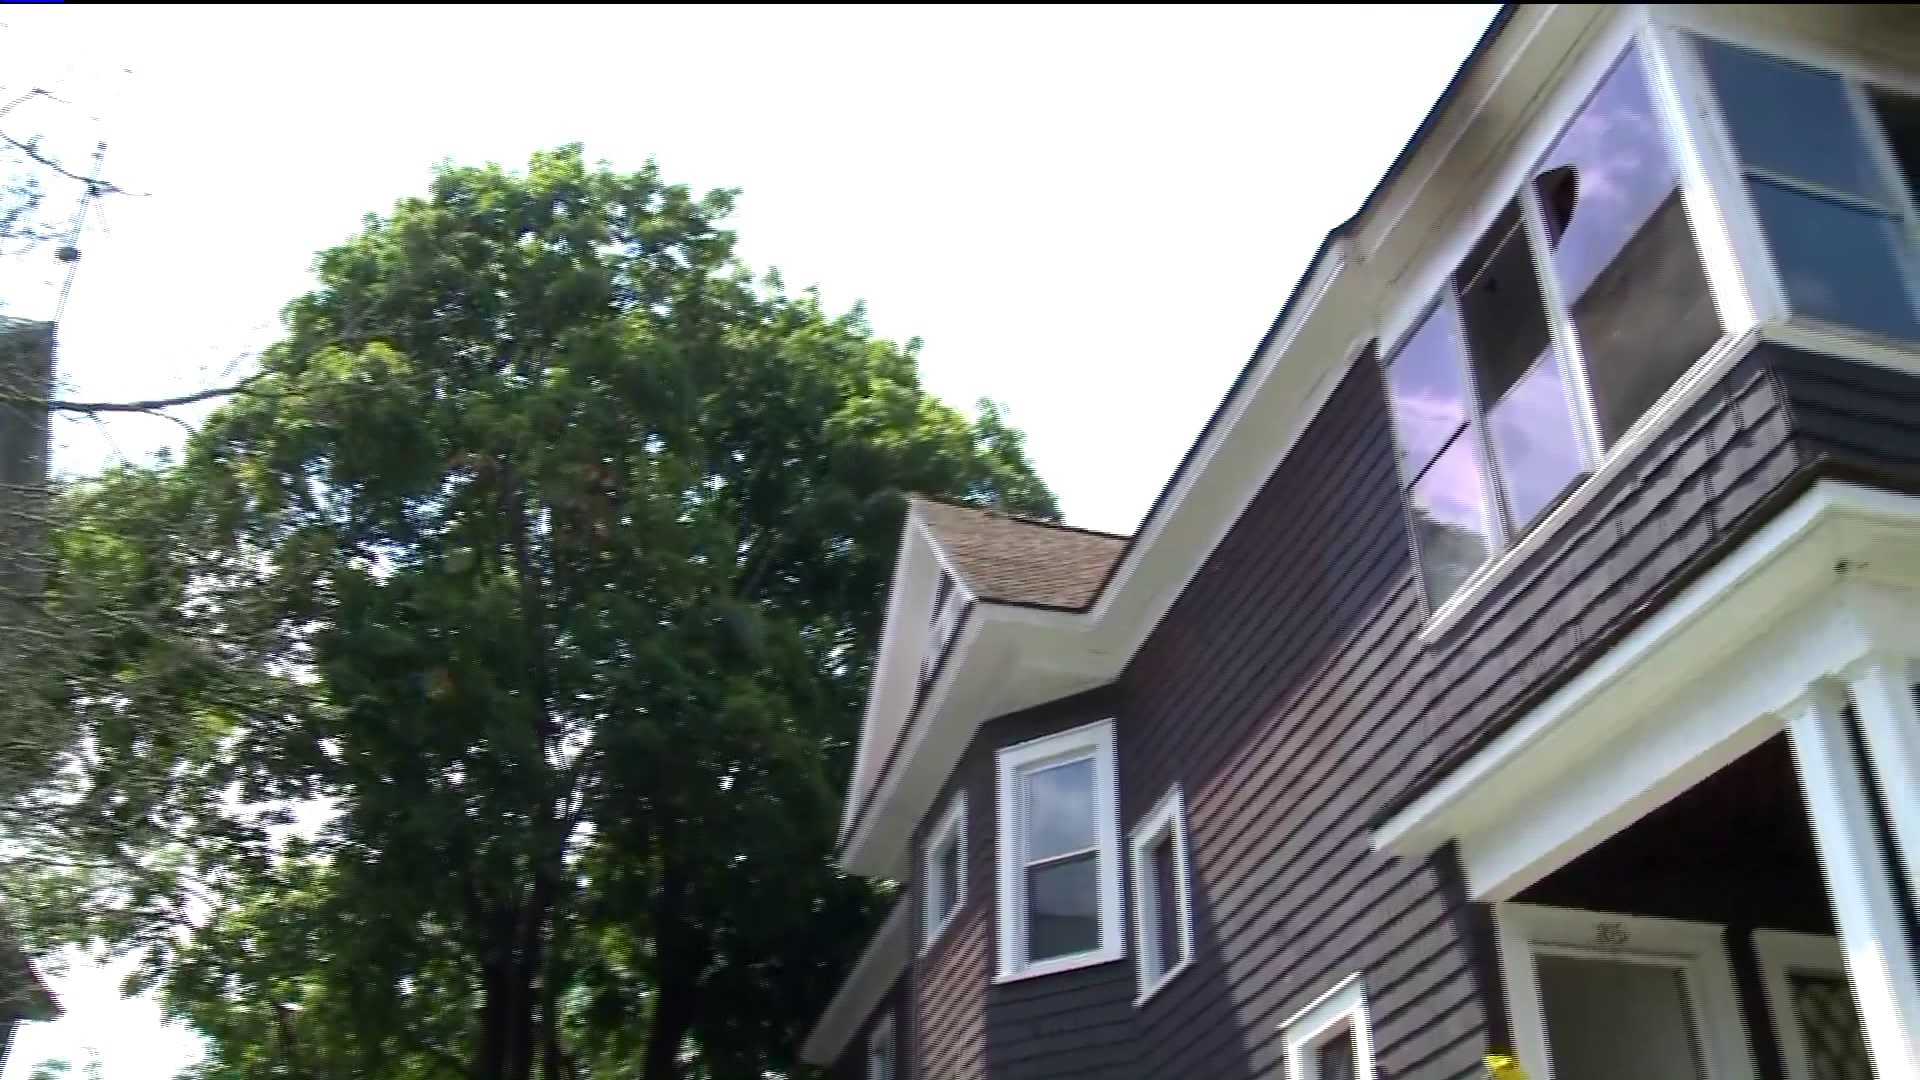 Good Samaritan alerts East Hartford family about fire, all safely escape